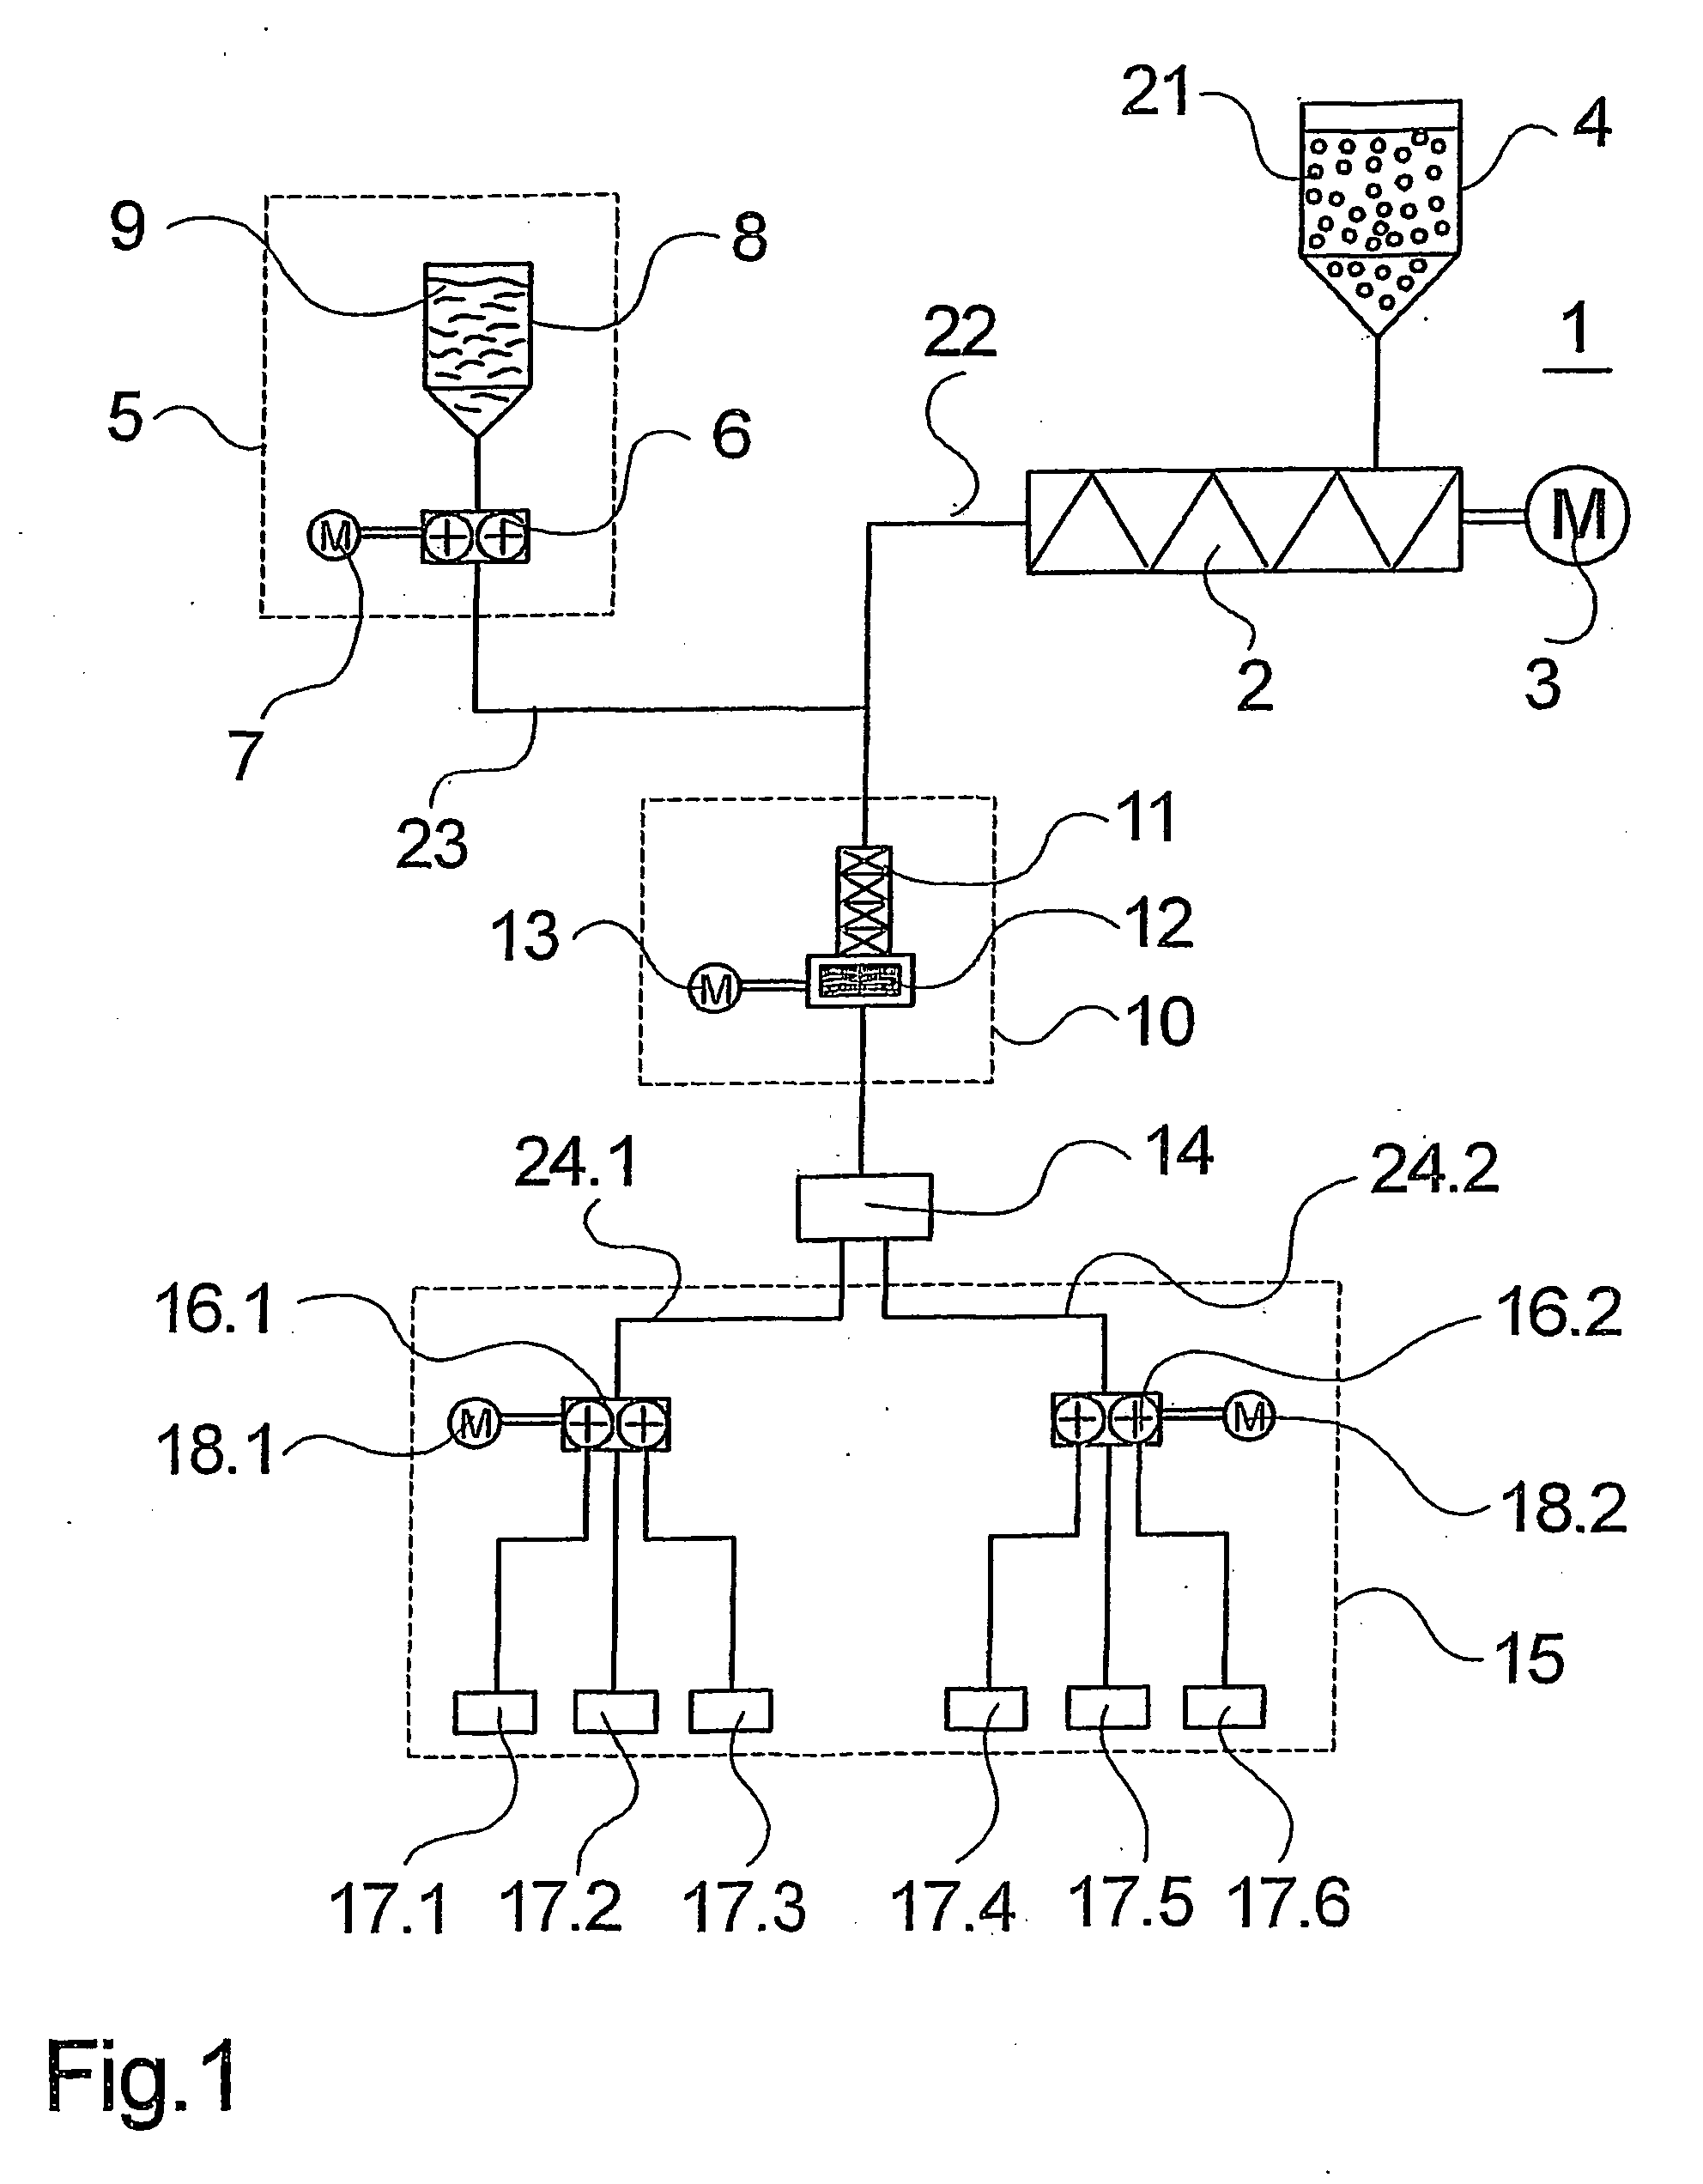 Apparatus and method for melt spinning dyed yarn filaments